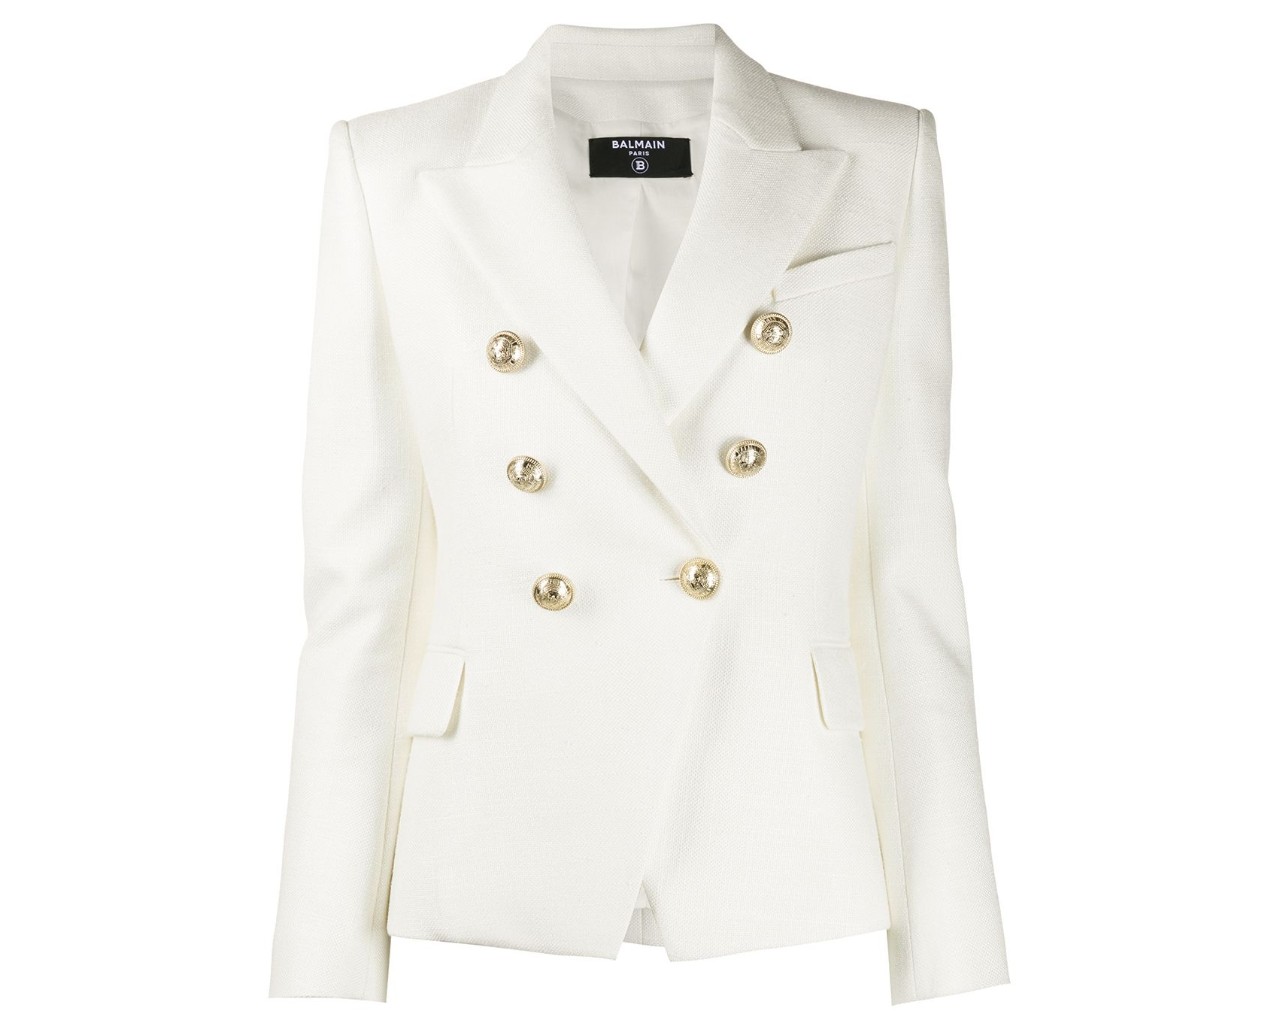 Balmain Textured Blazer, inspired by the suffragette suit Kamala Harris wore during victory speech